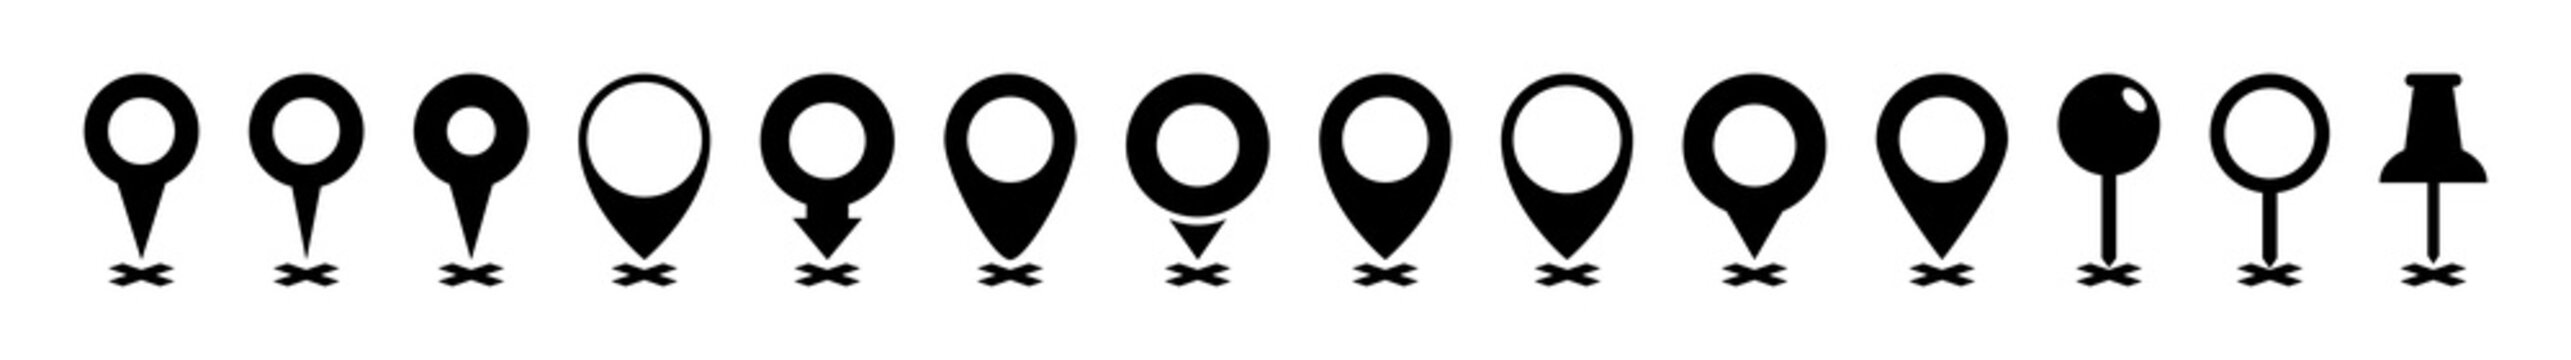 Location pin icon set. Map pin place marker. Location icon. Map marker pointer icon collection. GPS location symbol collection. Vector graphic